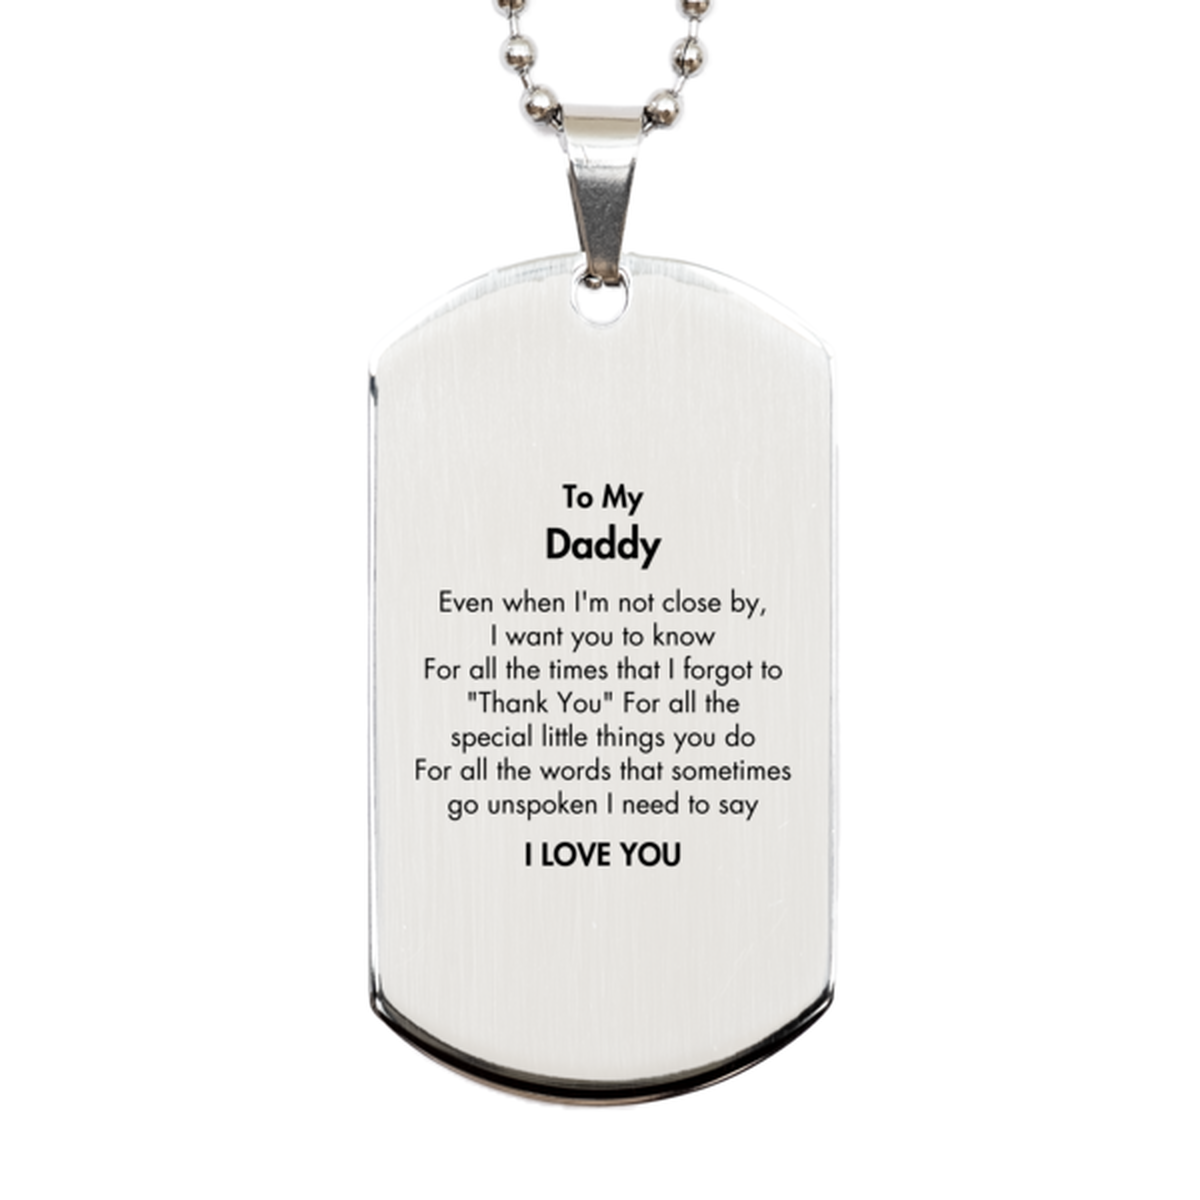 Thank You Gifts for Daddy, Keepsake Silver Dog Tag Gifts for Daddy Birthday Mother's day Father's Day Daddy For all the words That sometimes go unspoken I need to say I LOVE YOU